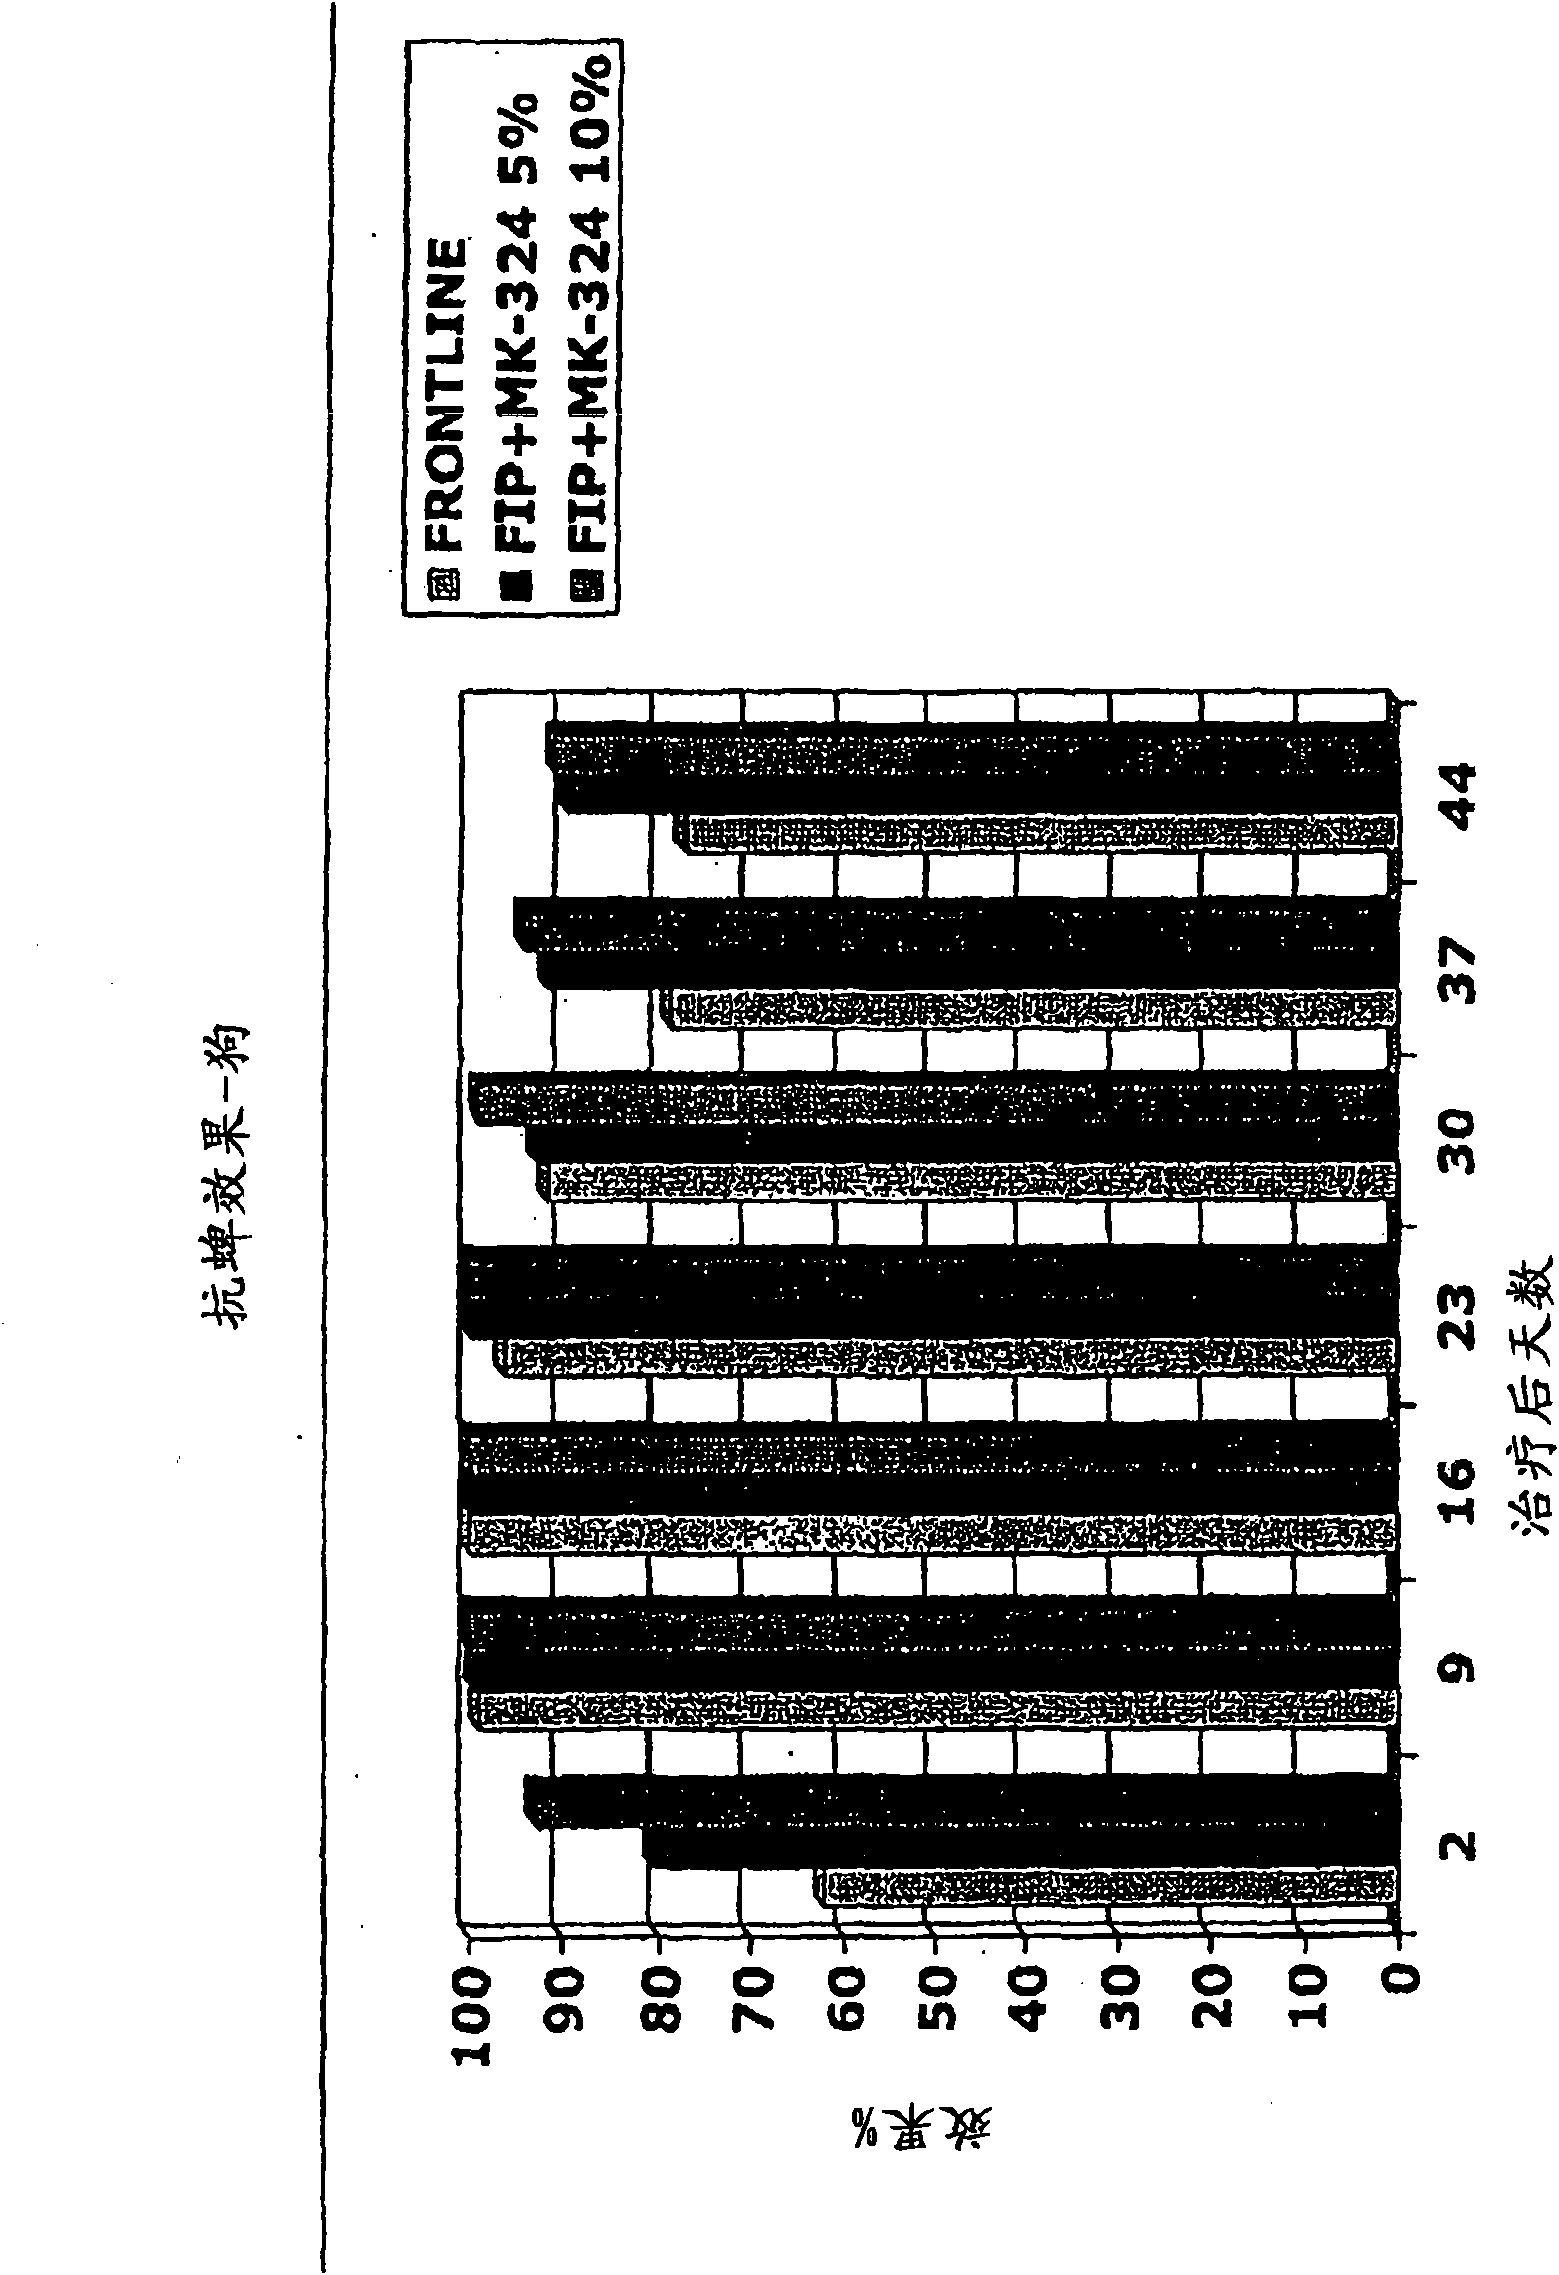 Compositions comprising c-13 alkoxyether macrolide compounds and phenylpyrazole compounds